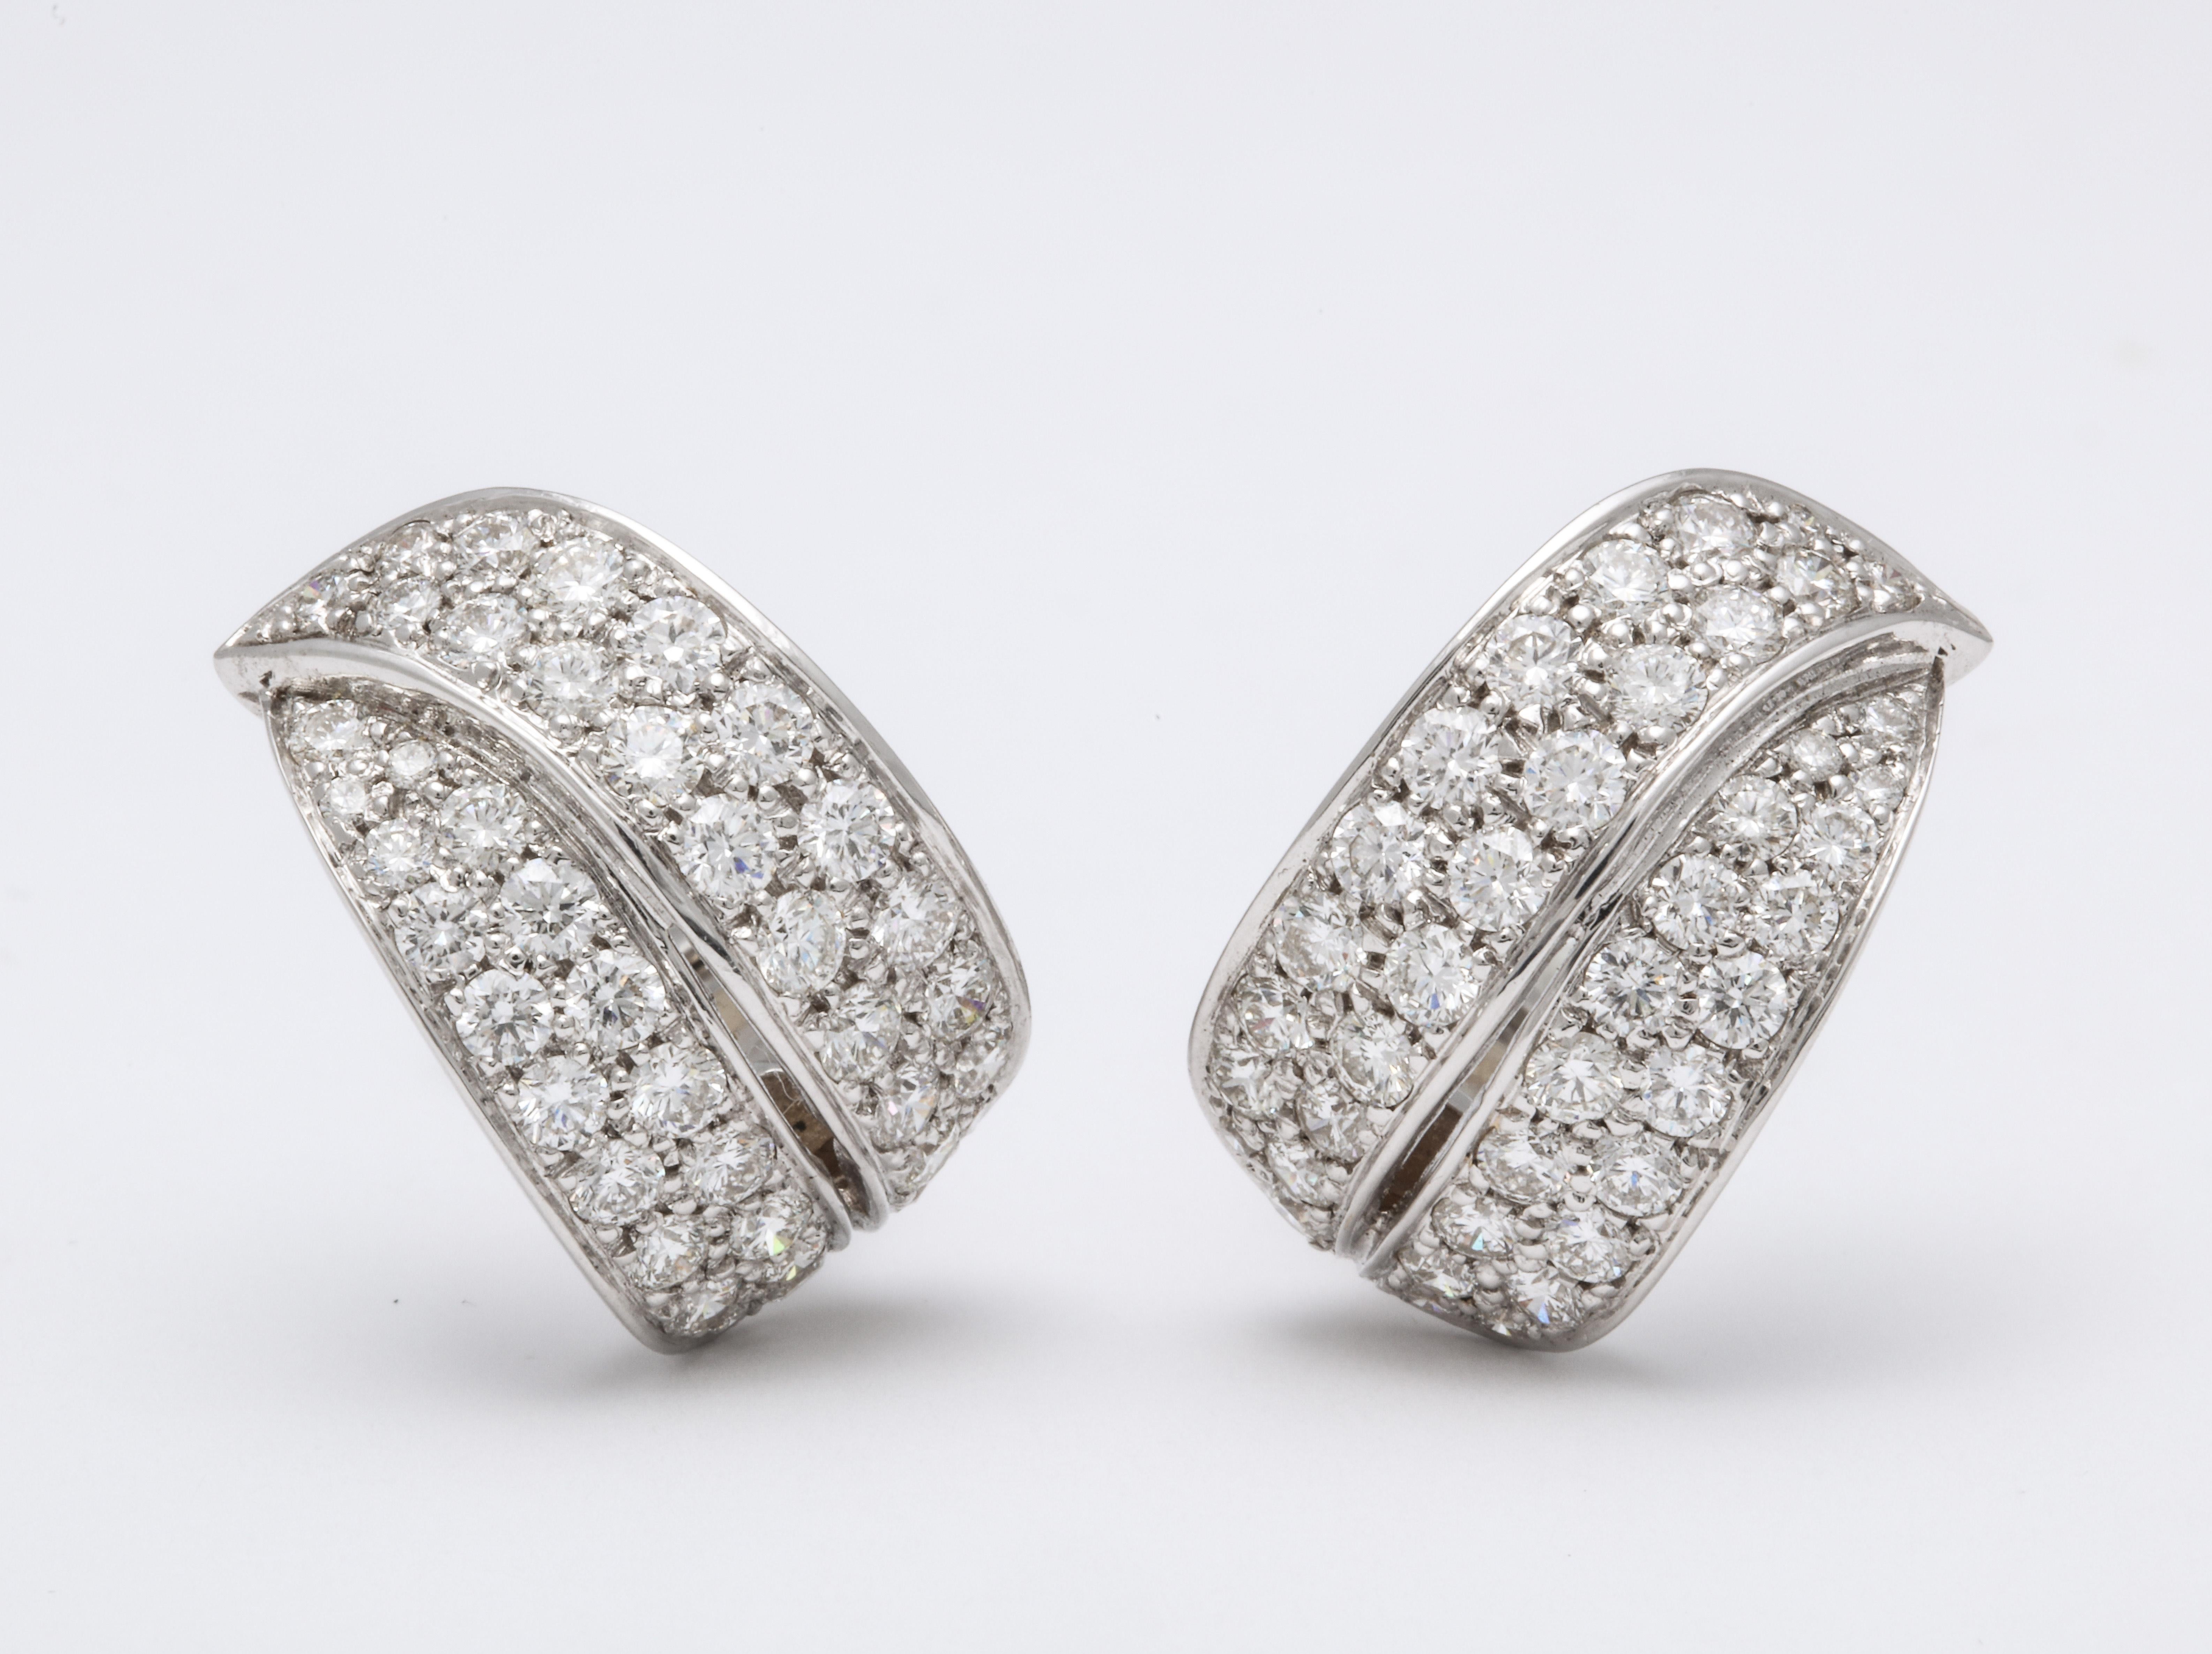 Chic yet easy 18K white gold stylized ''partial'' hoop earrings decorated with colorless round brilliant-cut pave'-set diamonds: 3.82 carats.  These earrings have a LEFT and RIGHT ear orientation.  
Earrings are fabricated with French clips and can